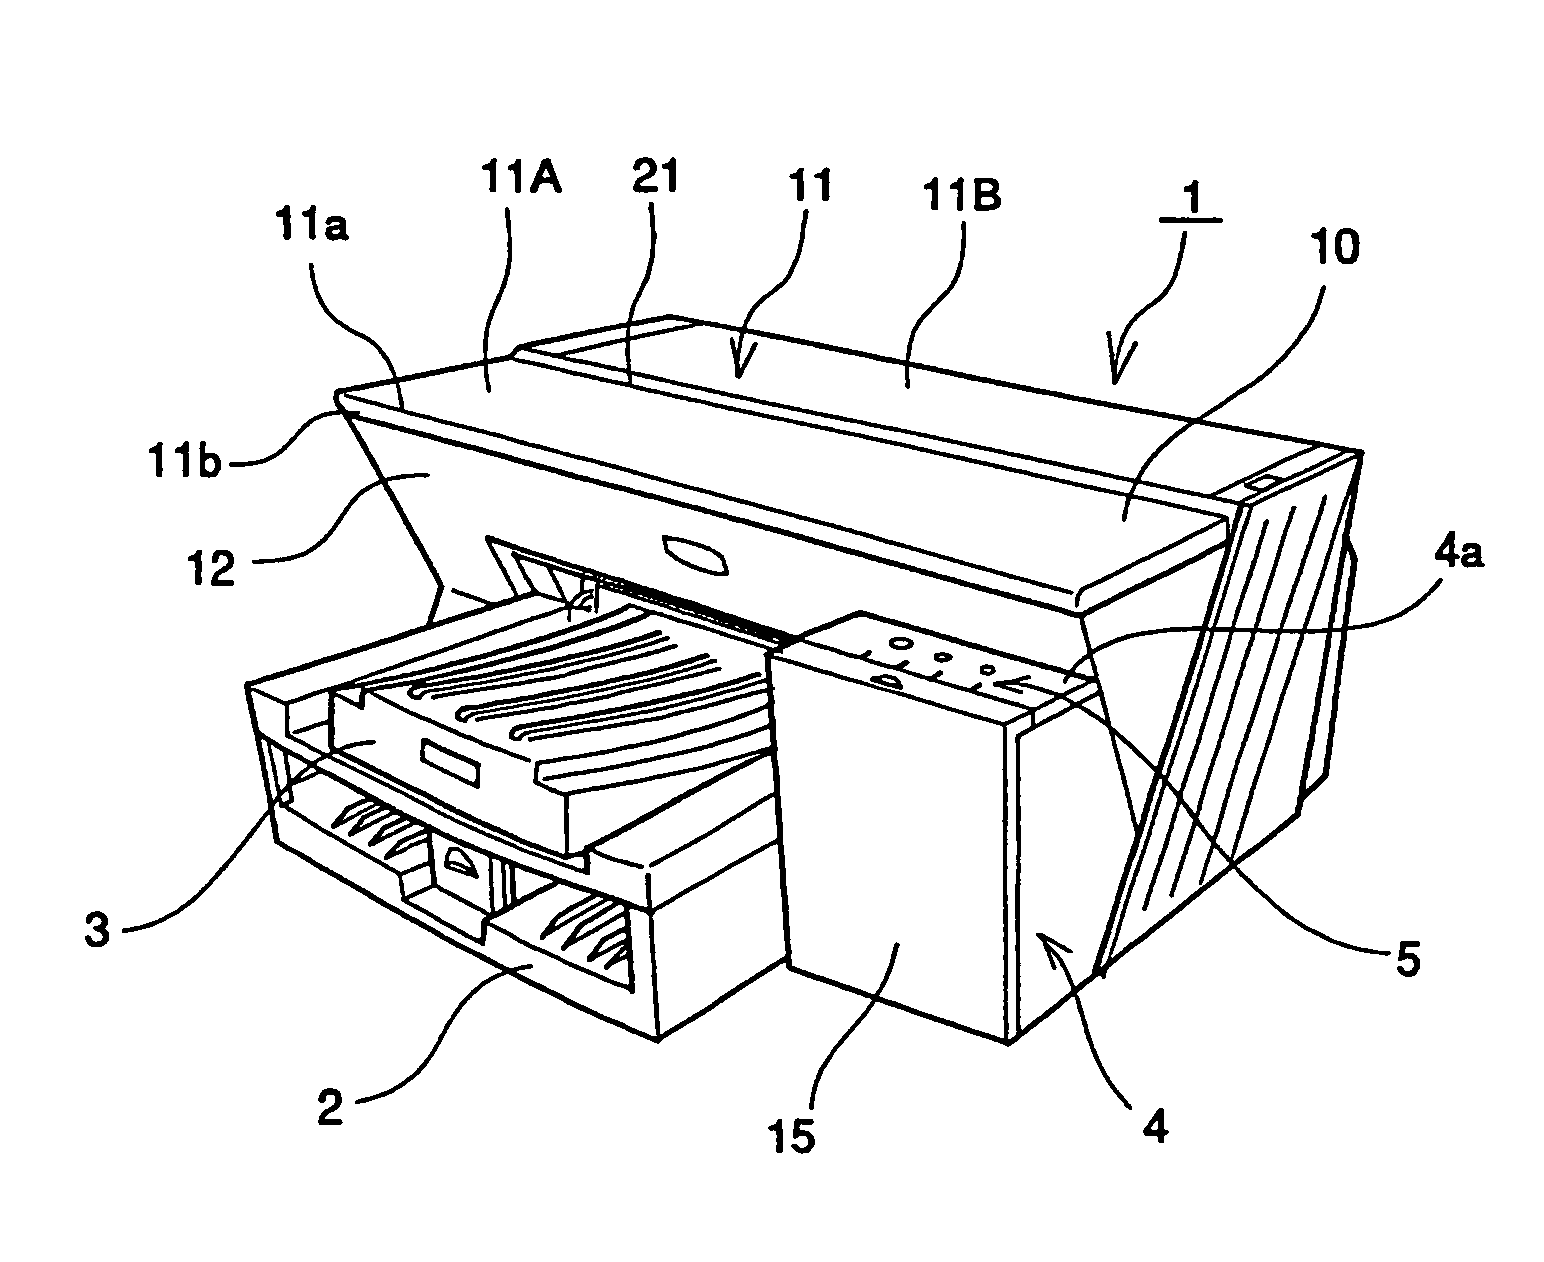 Compact front-operable image forming apparatus